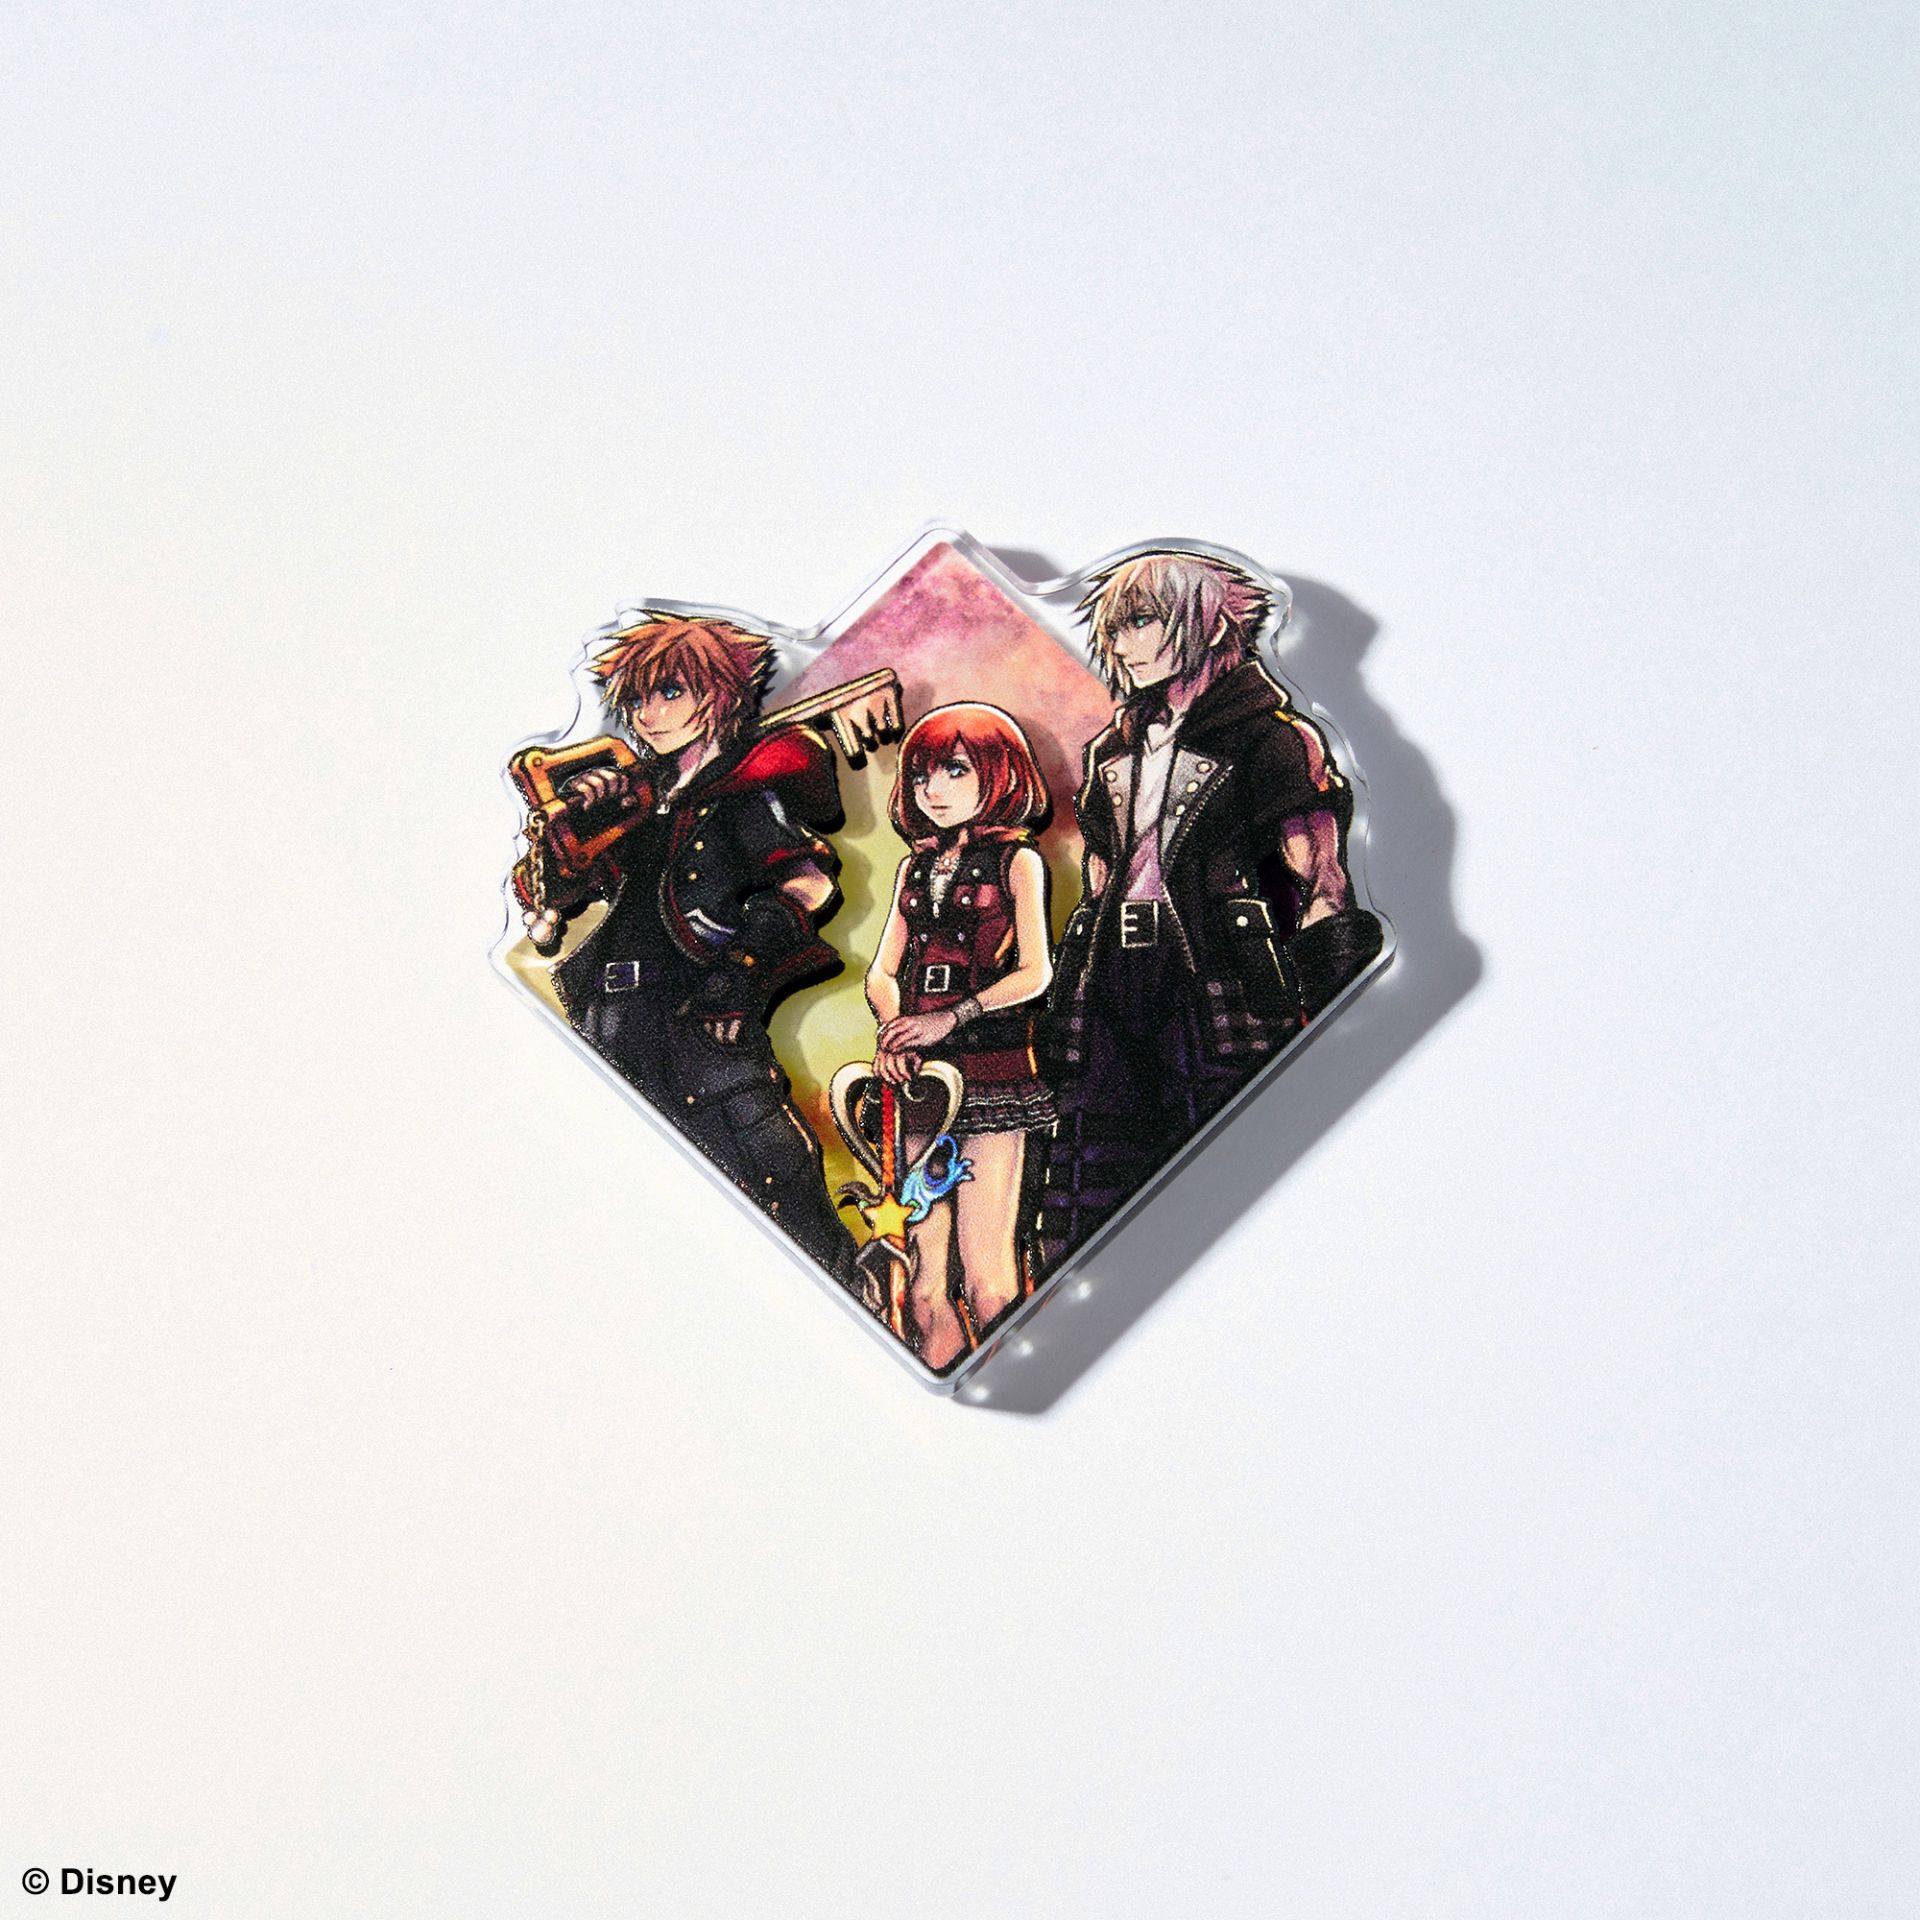 Kingdom Hearts Magnet Gallery Blind Box Set Vol. 4 Available for Pre-Order; October 2022 Shipment